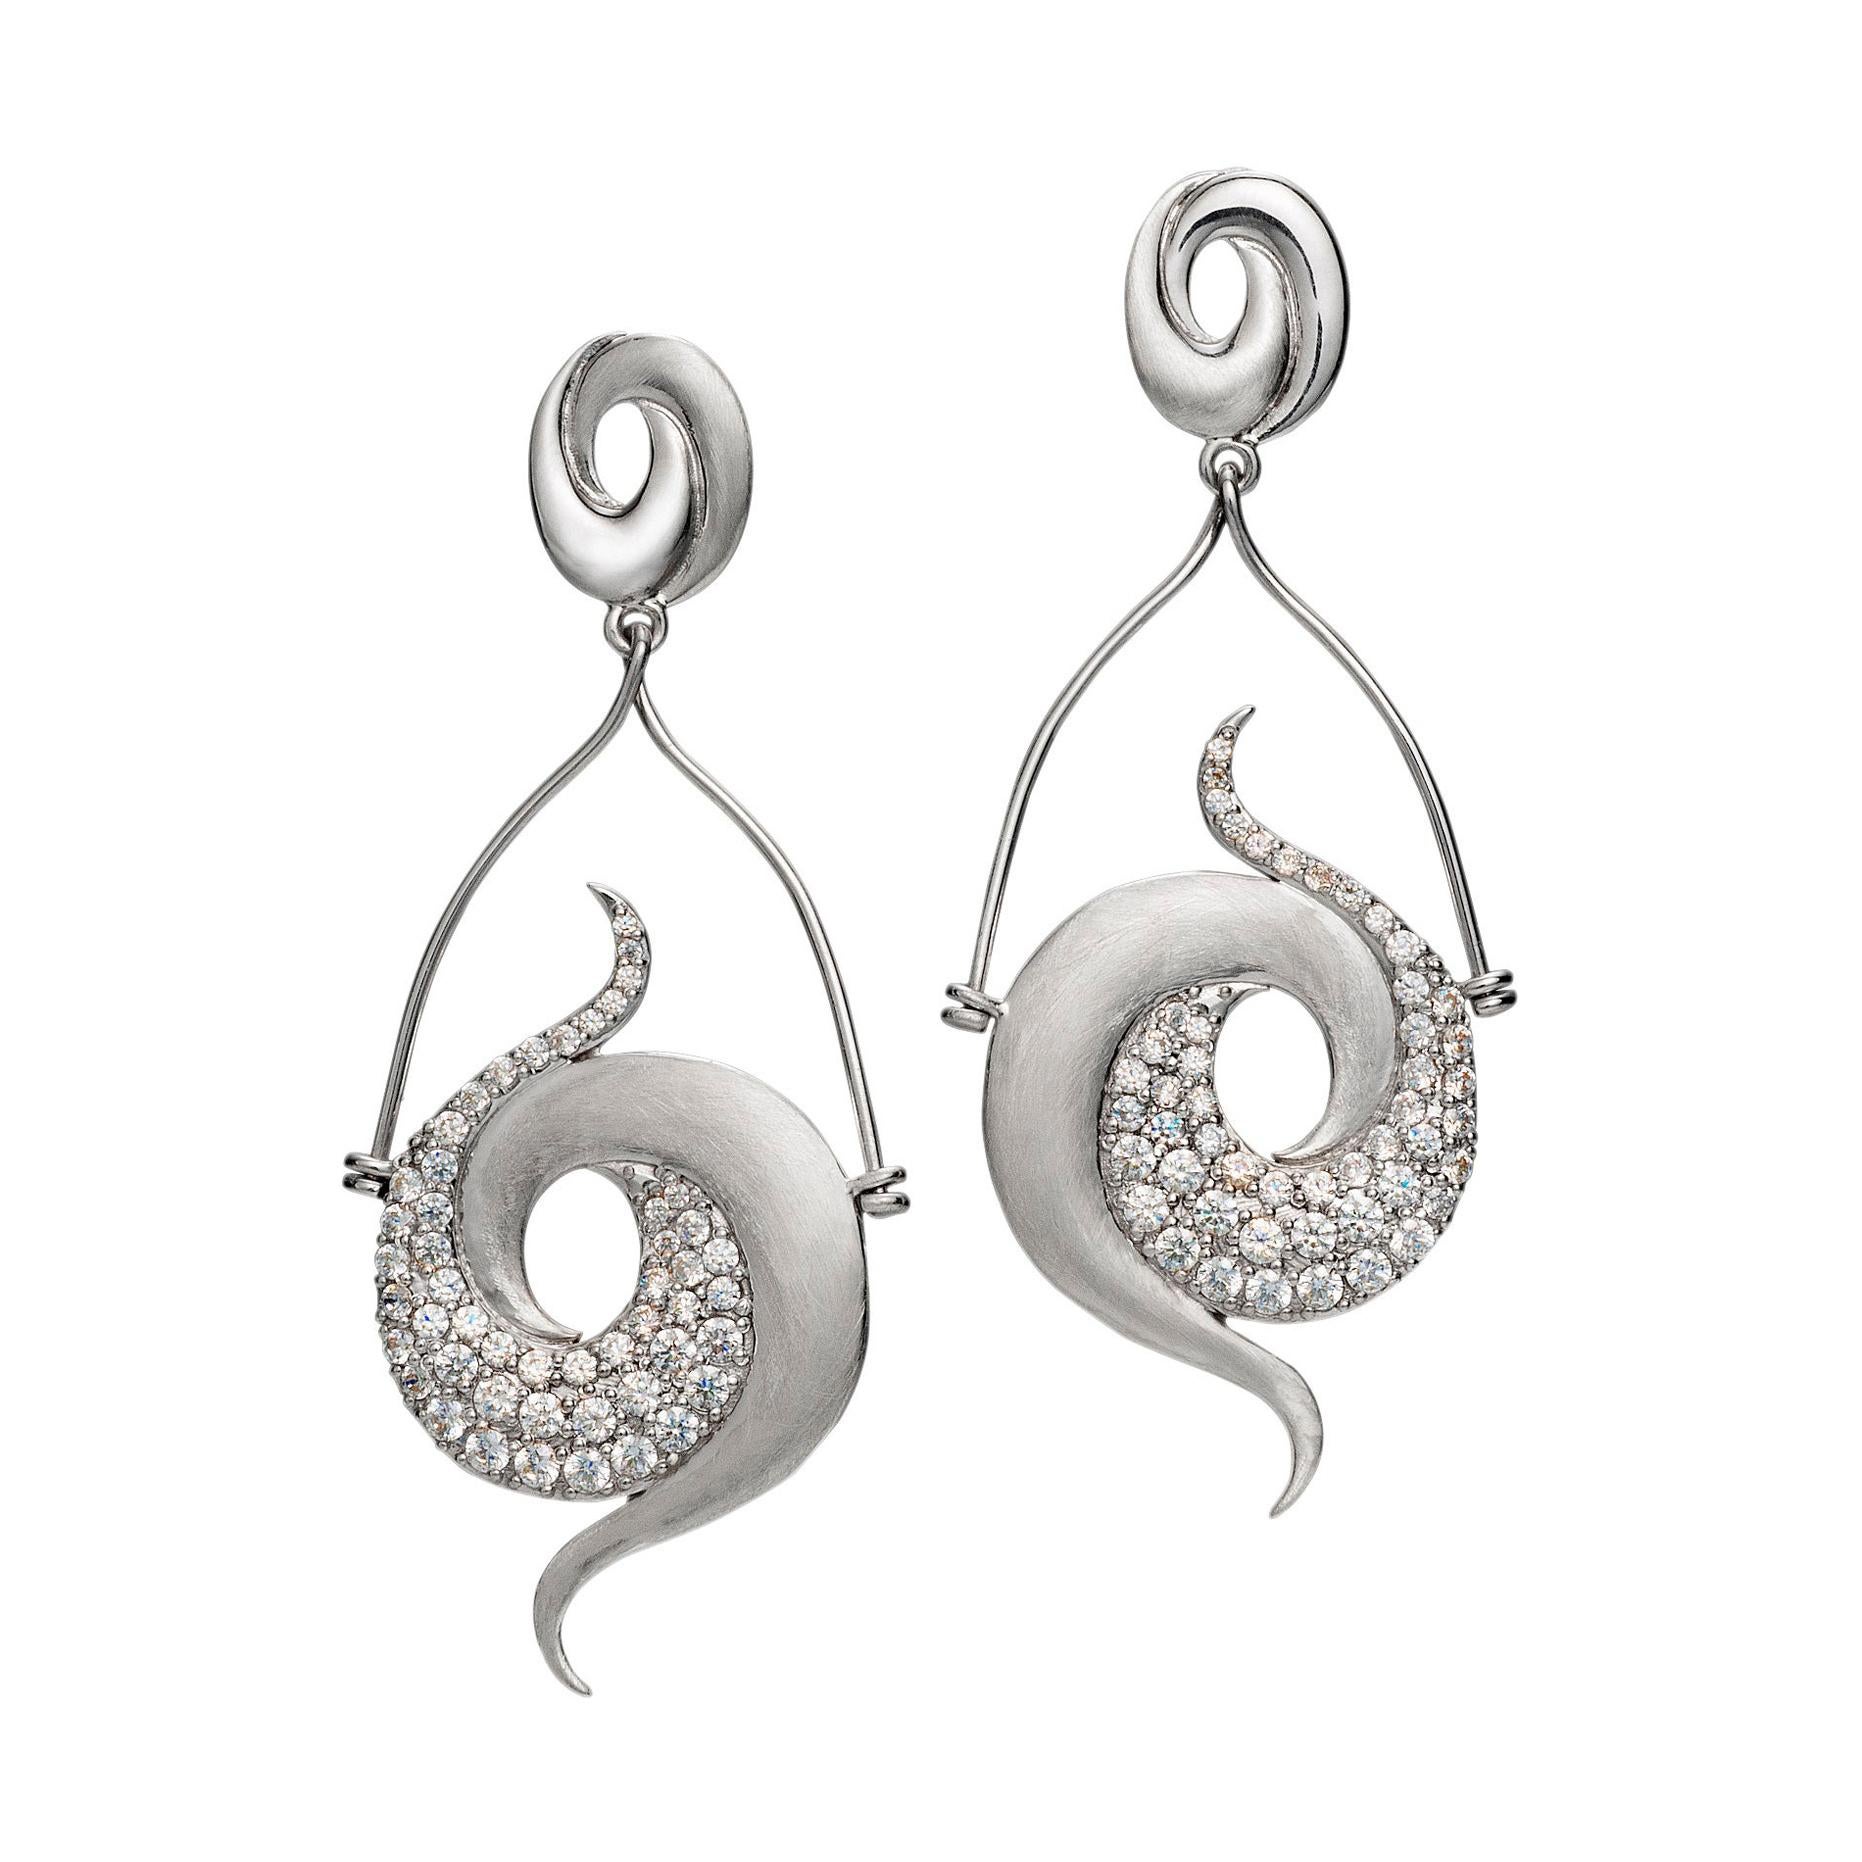 Double Galaxy Earrings Dangle Earrings in Sterling with Sparkling White Stones For Sale